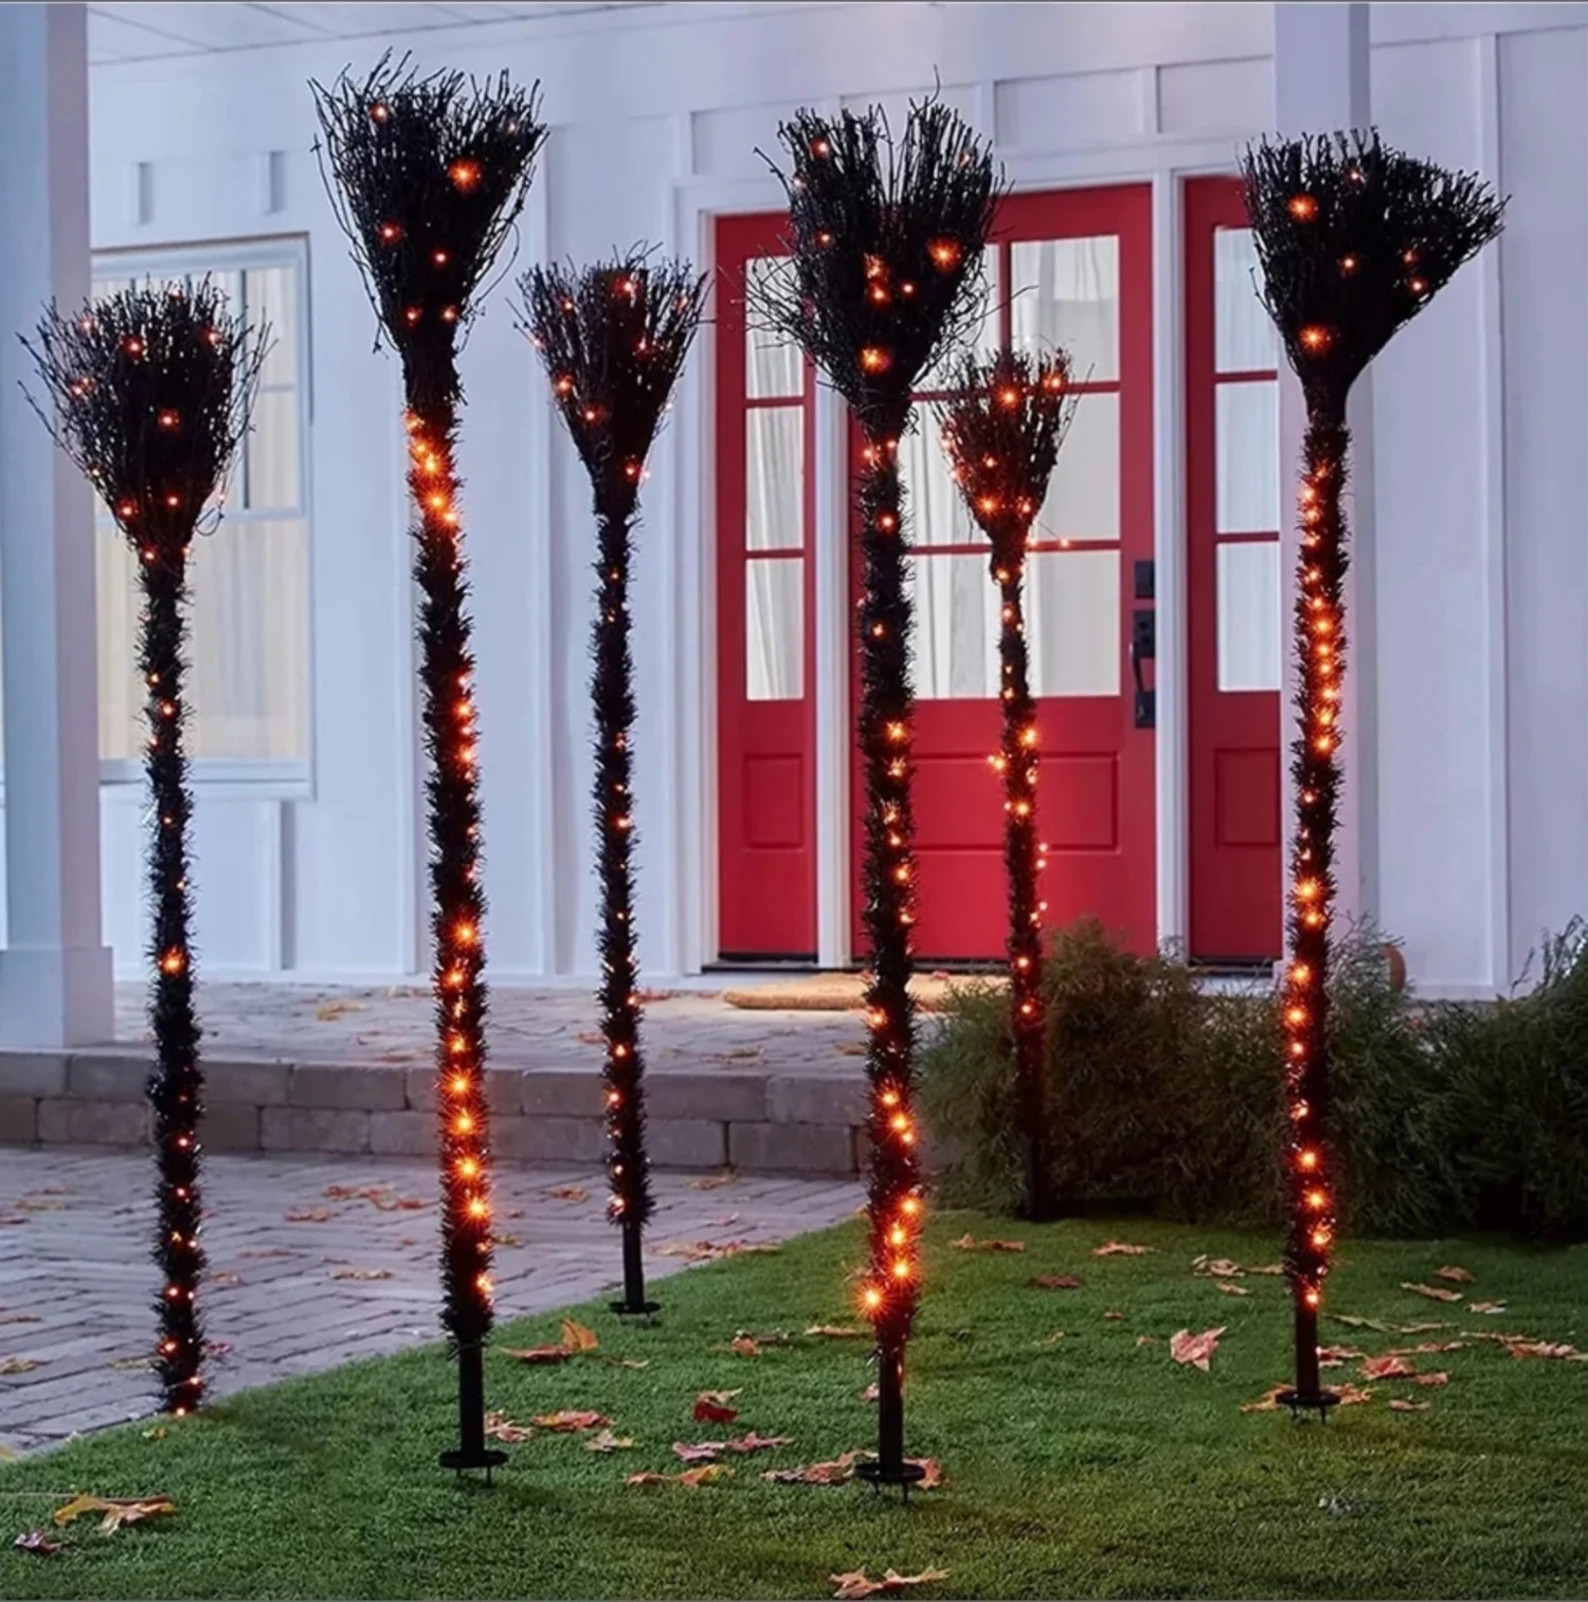 16 Creepy Halloween Decorations For Your Home